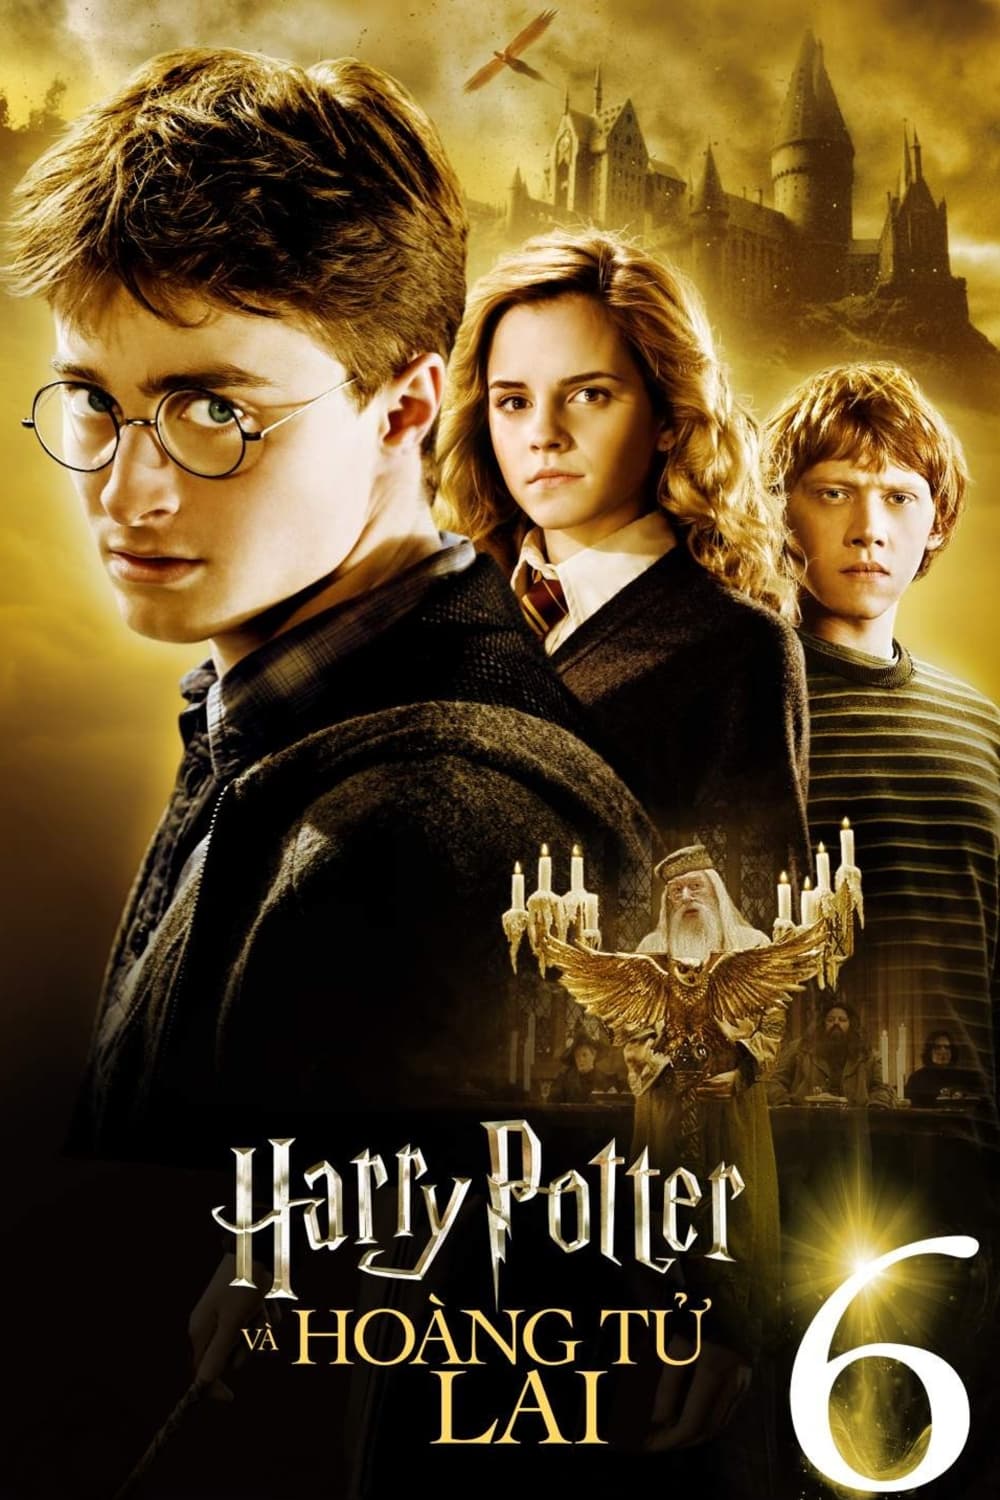 Harry Potter và Hoàng Tử Lai (Harry Potter and the Half-Blood Prince) [2009]